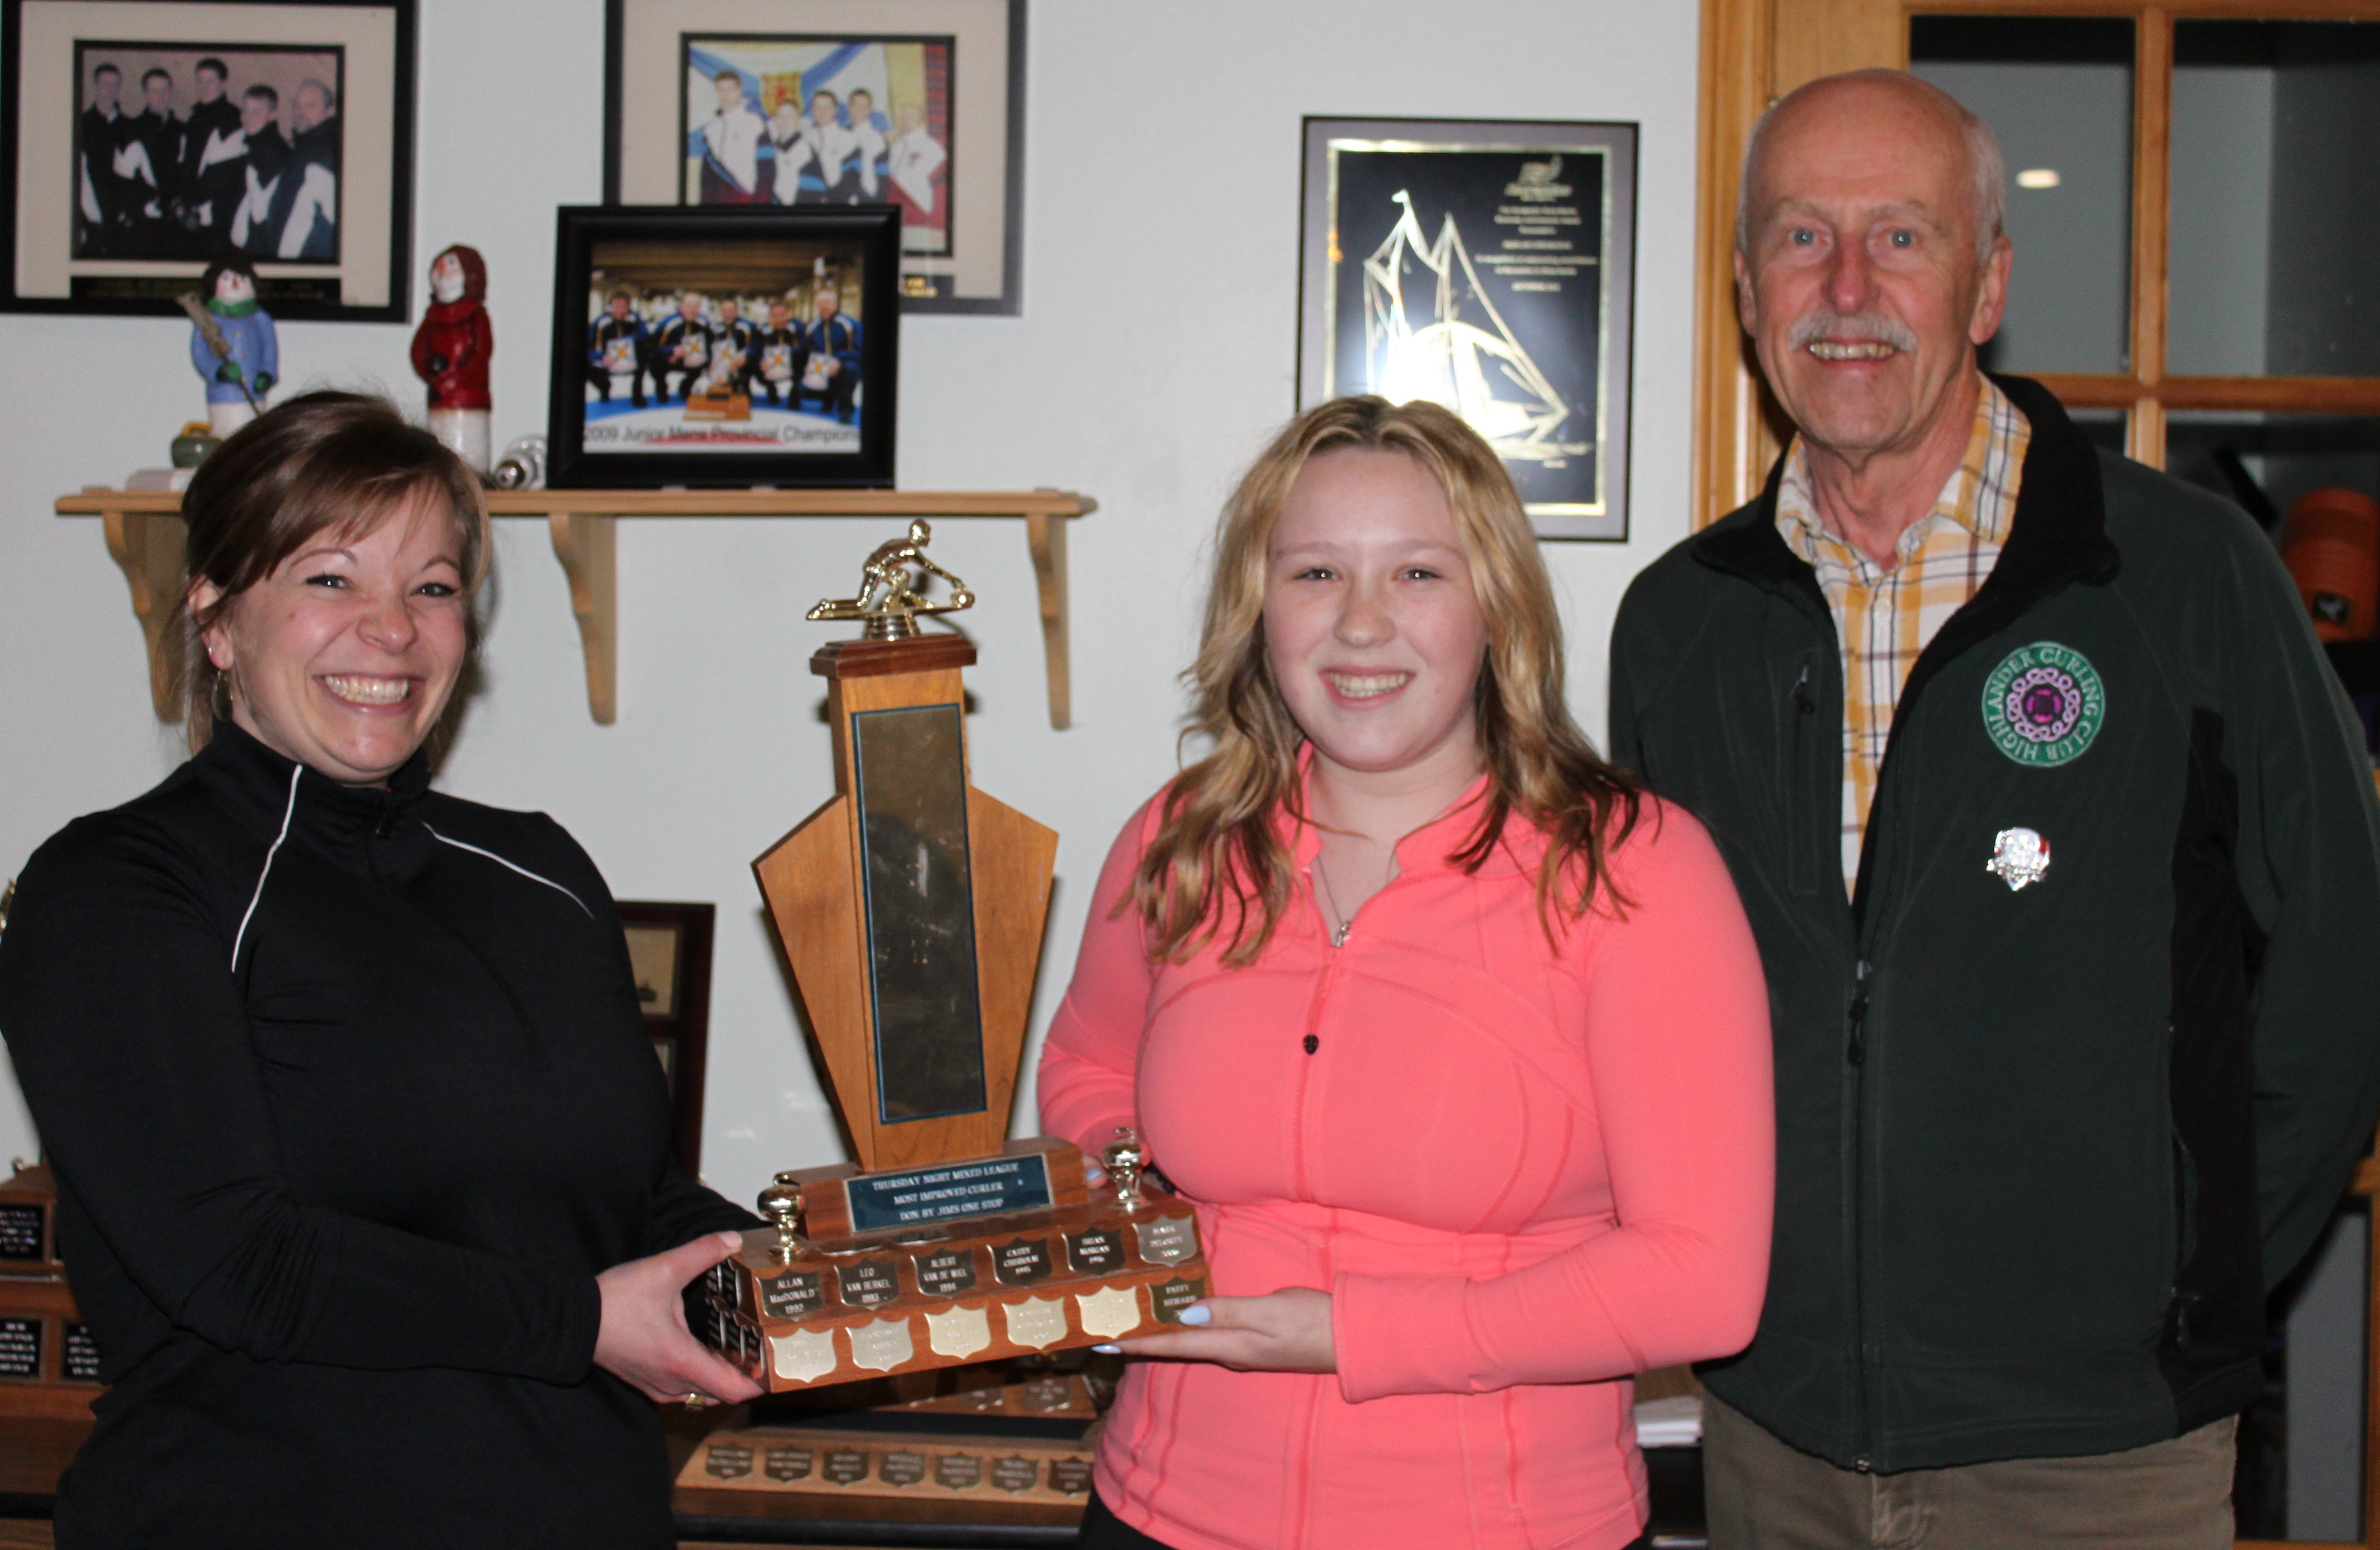 Thursday Night Most Improved: Deidra Fraser
Presented by Alicia Mills and Harry Daeman